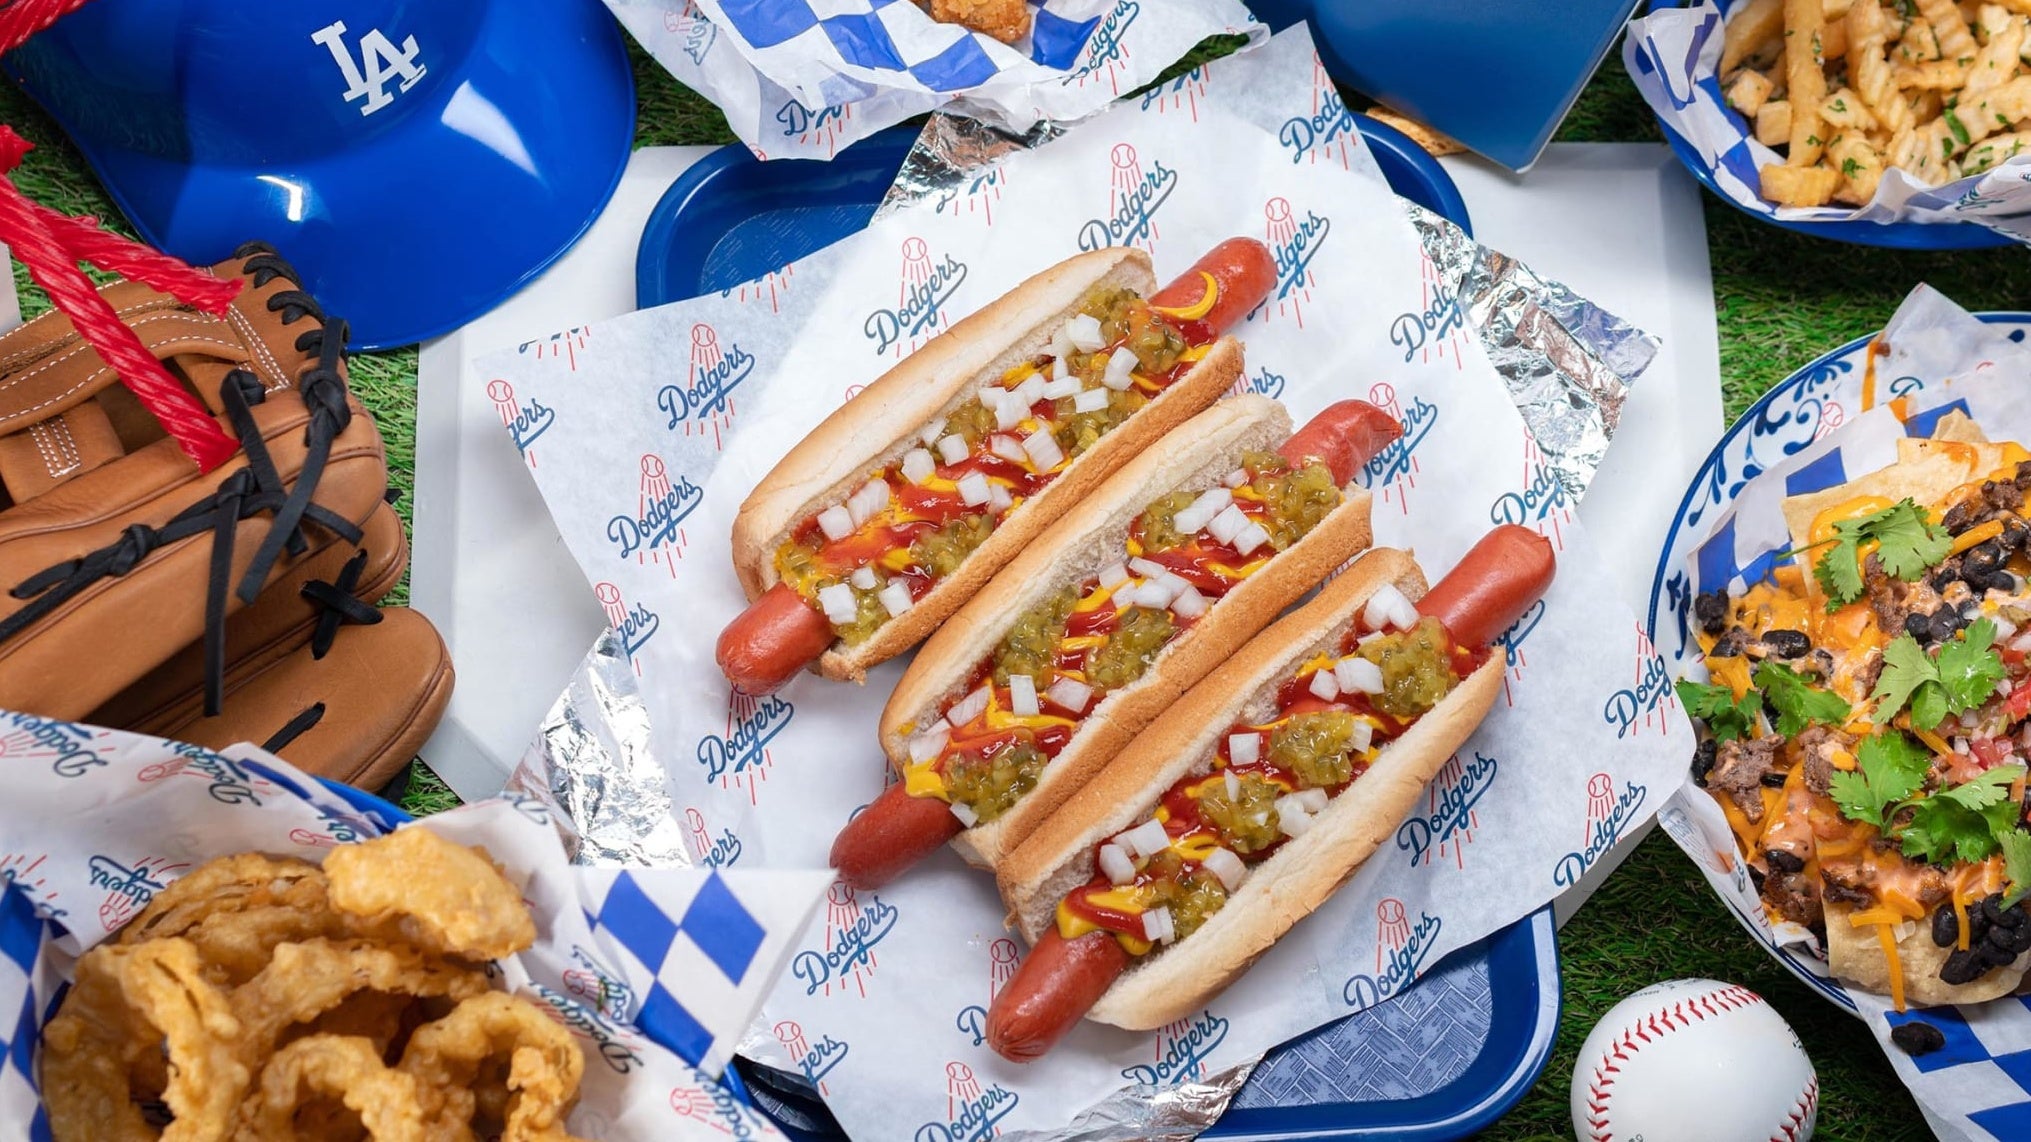 The Best Hot Dogs in Los Angeles